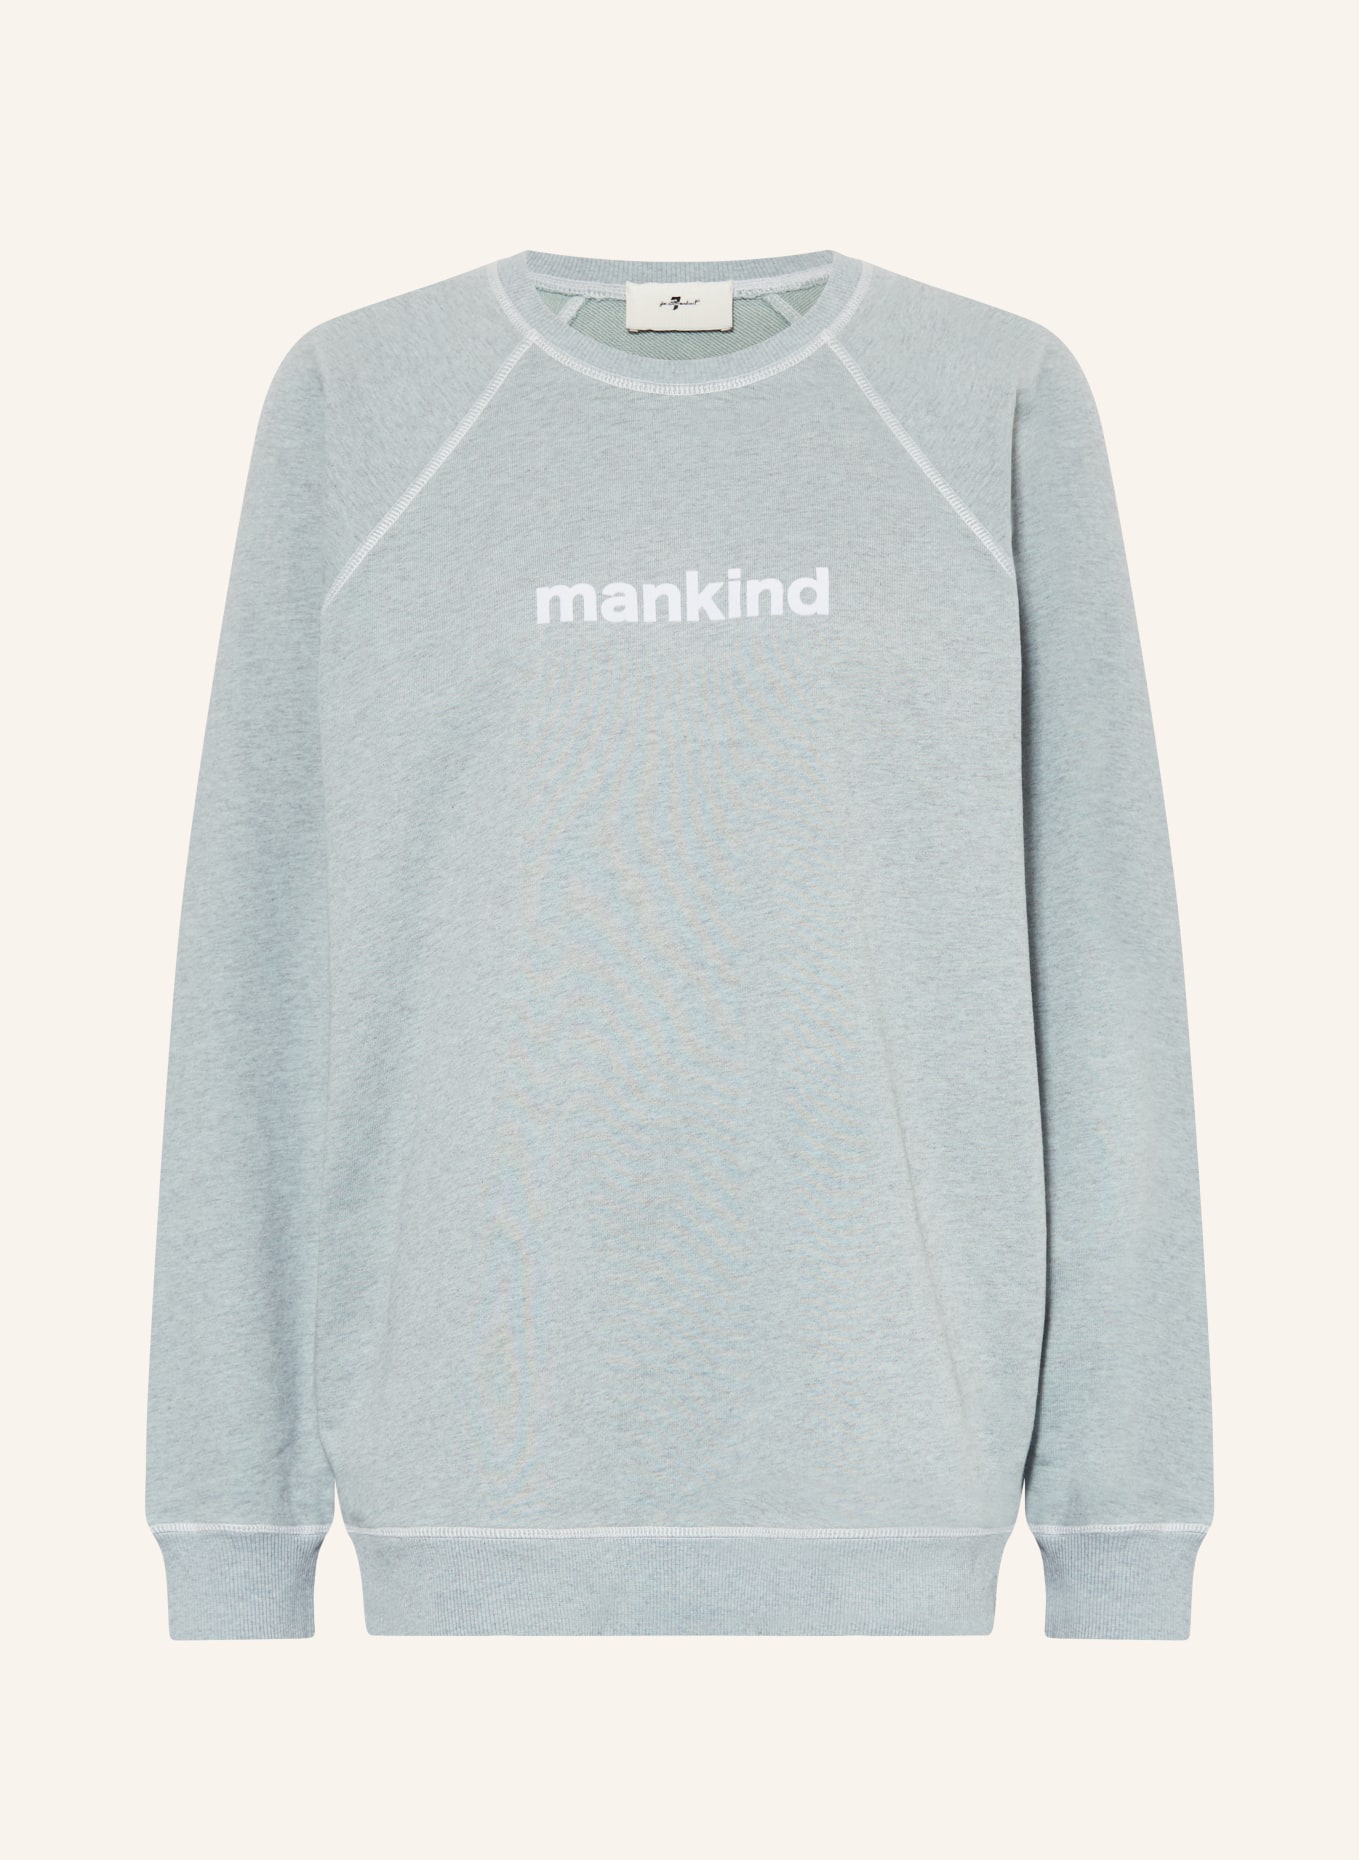 7 for all mankind Sweatshirt, Color: GRAY (Image 1)